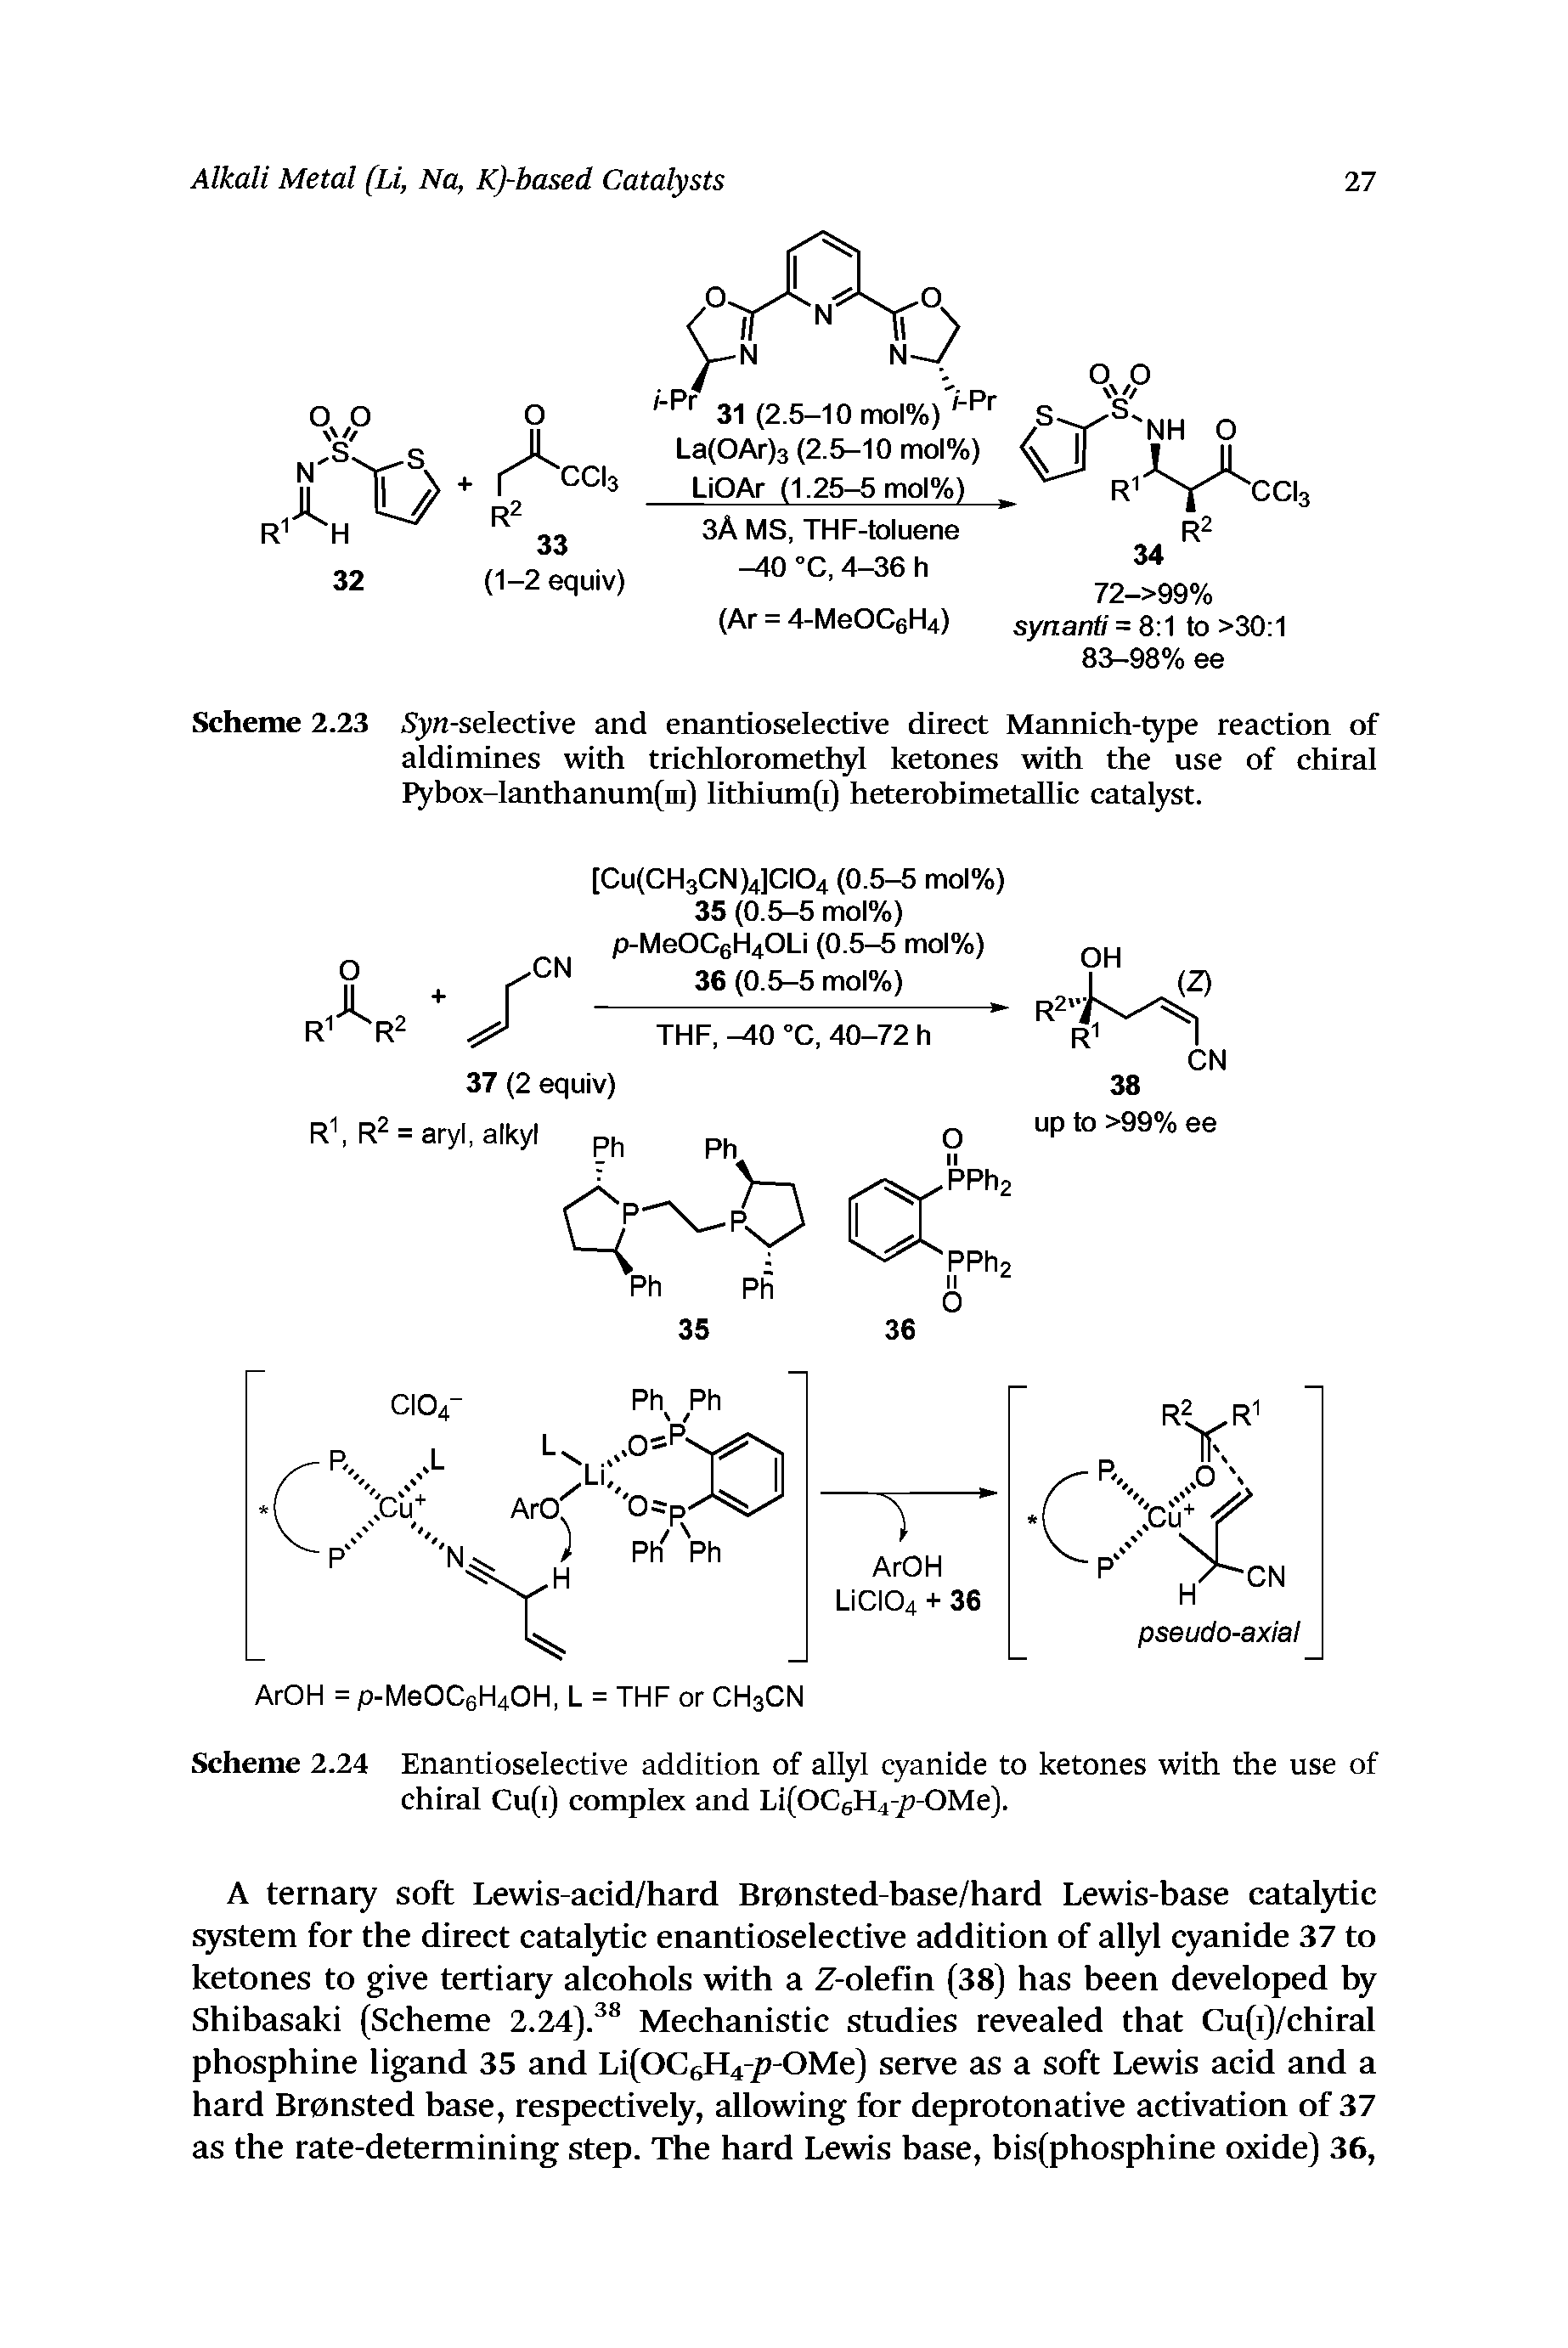 Scheme 2.23 Sjw-selective and enantioselective direct Mannich-type reaction of aldimines with trichloromethyl ketones with the use of chiral I box-lanthanum(ni) lithium(i) heterobimetallic catalyst.